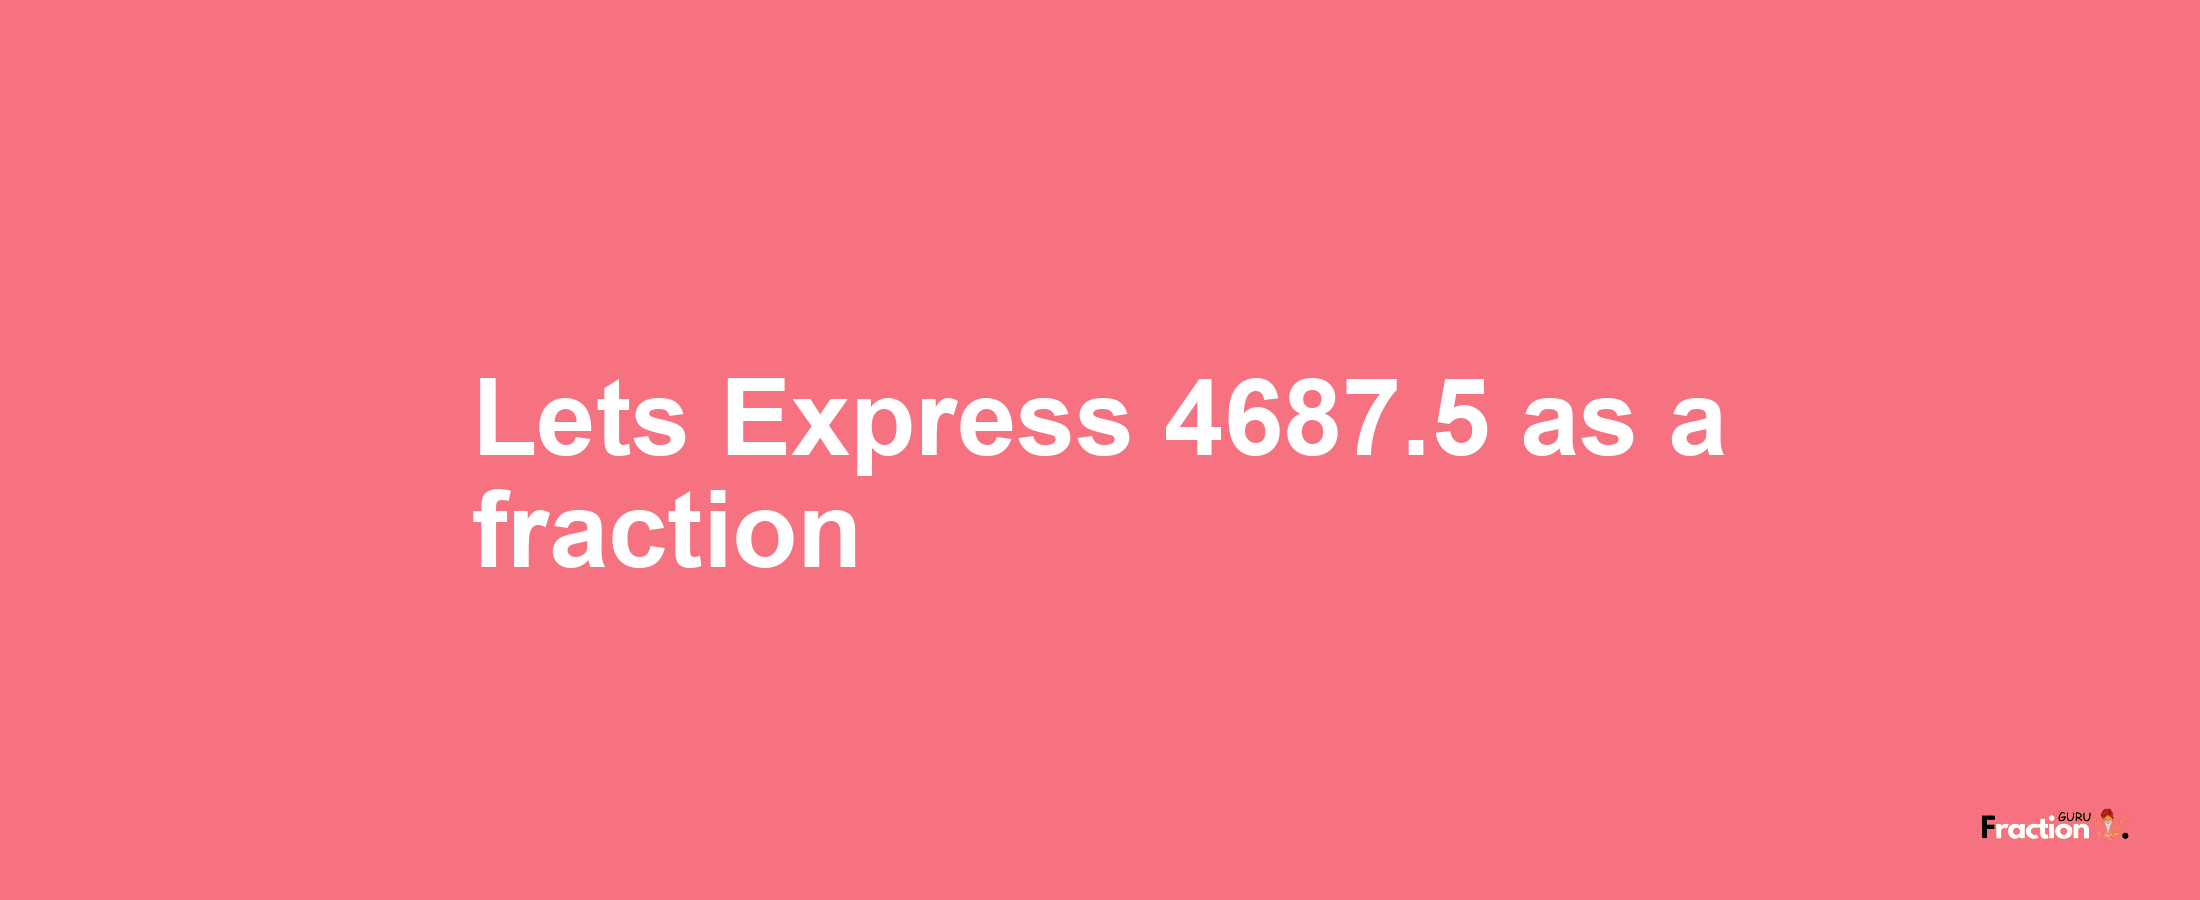 Lets Express 4687.5 as afraction